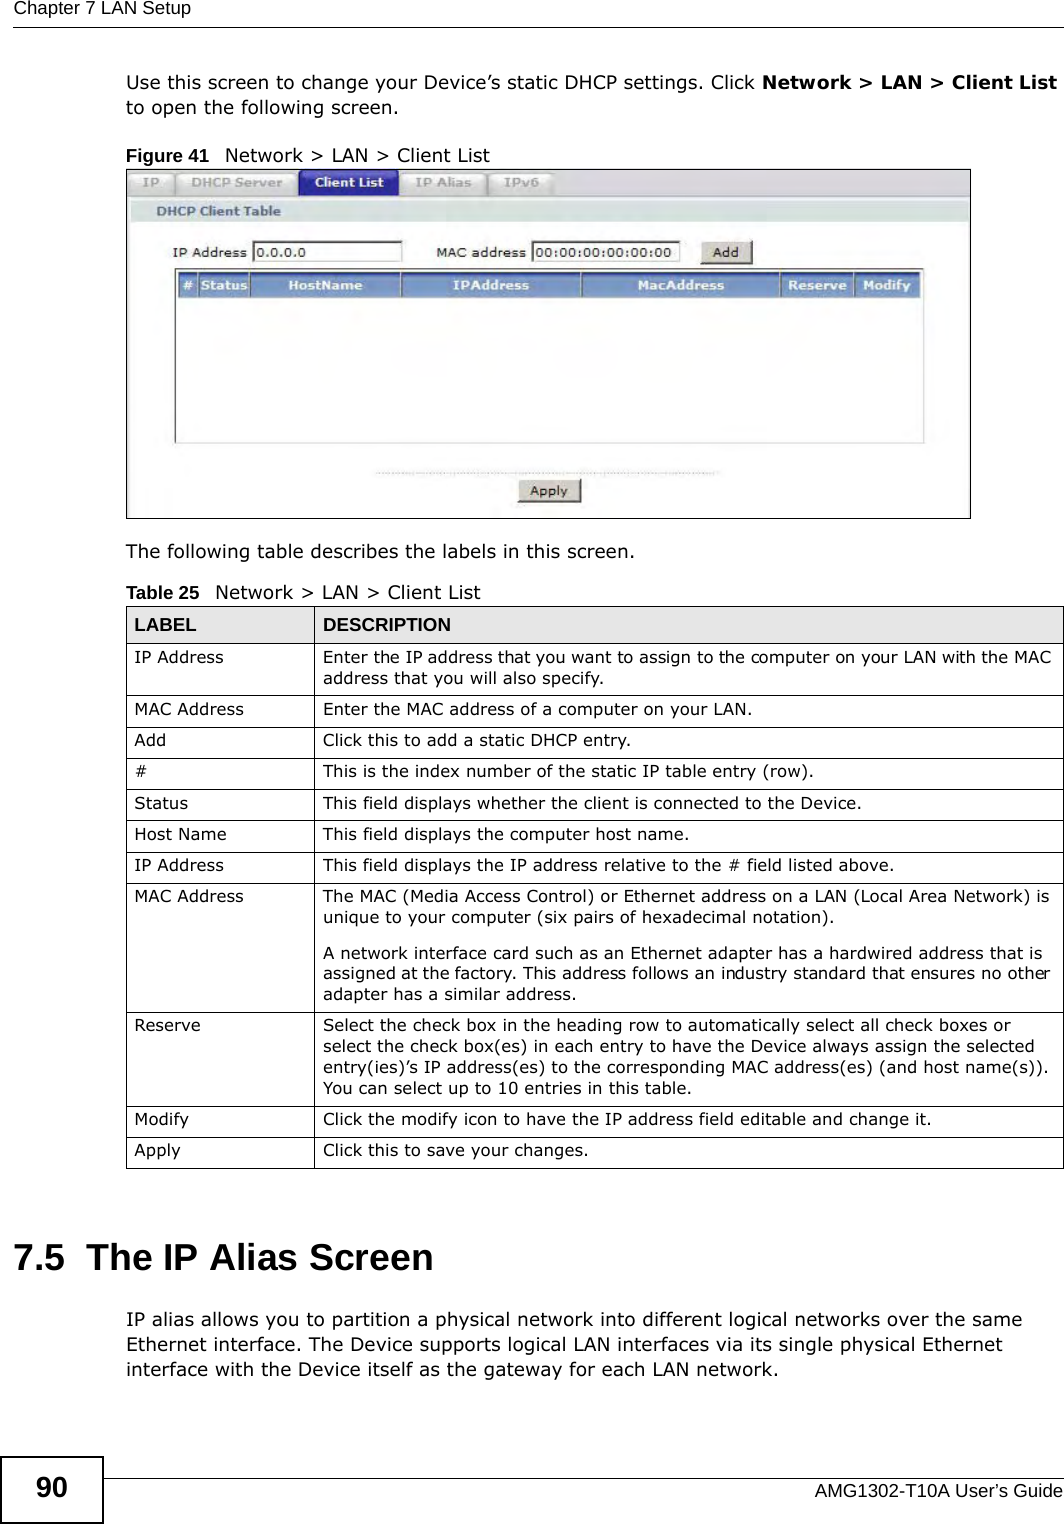 Chapter 7 LAN SetupAMG1302-T10A User’s Guide90Use this screen to change your Device’s static DHCP settings. Click Network &gt; LAN &gt; Client List to open the following screen.Figure 41   Network &gt; LAN &gt; Client List The following table describes the labels in this screen.7.5  The IP Alias ScreenIP alias allows you to partition a physical network into different logical networks over the same Ethernet interface. The Device supports logical LAN interfaces via its single physical Ethernet interface with the Device itself as the gateway for each LAN network.Table 25   Network &gt; LAN &gt; Client ListLABEL DESCRIPTIONIP Address Enter the IP address that you want to assign to the computer on your LAN with the MAC address that you will also specify.MAC Address Enter the MAC address of a computer on your LAN.Add Click this to add a static DHCP entry. # This is the index number of the static IP table entry (row).Status This field displays whether the client is connected to the Device.Host Name  This field displays the computer host name.IP Address This field displays the IP address relative to the # field listed above.MAC Address The MAC (Media Access Control) or Ethernet address on a LAN (Local Area Network) is unique to your computer (six pairs of hexadecimal notation).A network interface card such as an Ethernet adapter has a hardwired address that is assigned at the factory. This address follows an industry standard that ensures no other adapter has a similar address.Reserve Select the check box in the heading row to automatically select all check boxes or select the check box(es) in each entry to have the Device always assign the selected entry(ies)’s IP address(es) to the corresponding MAC address(es) (and host name(s)). You can select up to 10 entries in this table. Modify Click the modify icon to have the IP address field editable and change it.Apply Click this to save your changes.